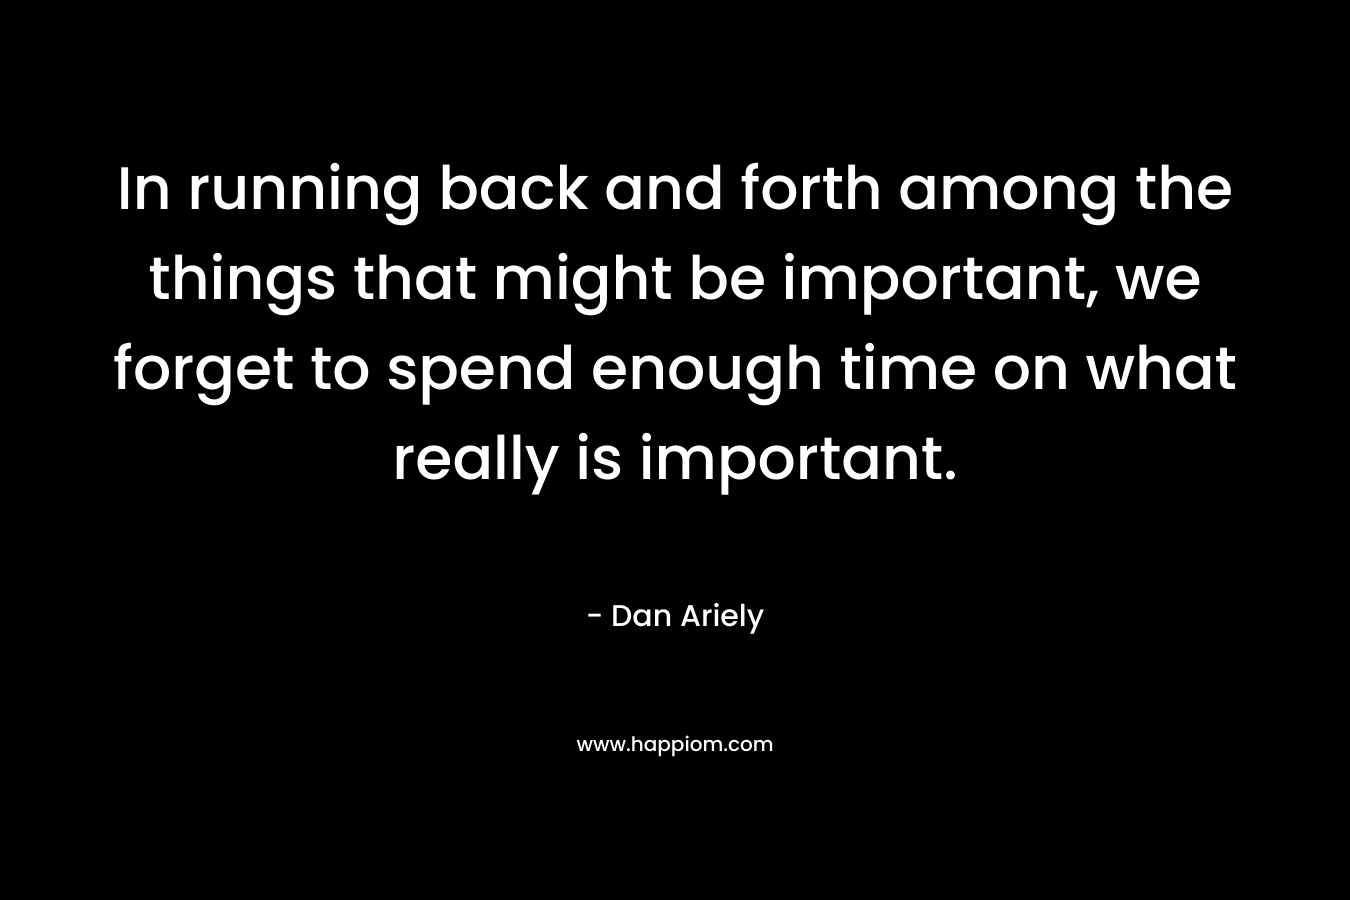 In running back and forth among the things that might be important, we forget to spend enough time on what really is important.